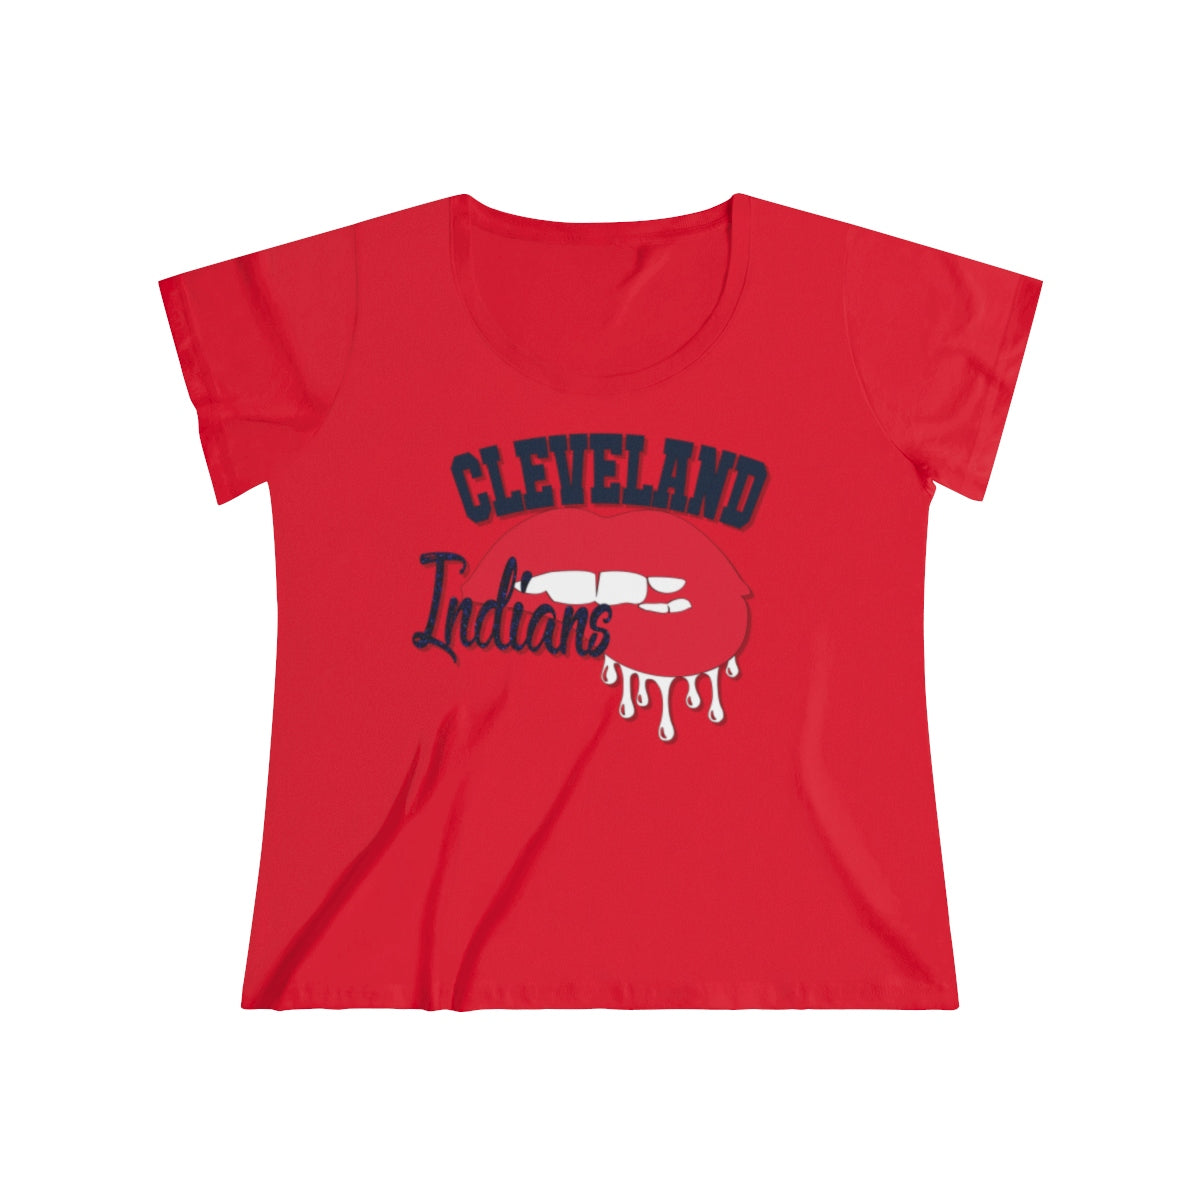 Cleveland Indians inspired Baseball Dripping Lips Women's Curvy Tee